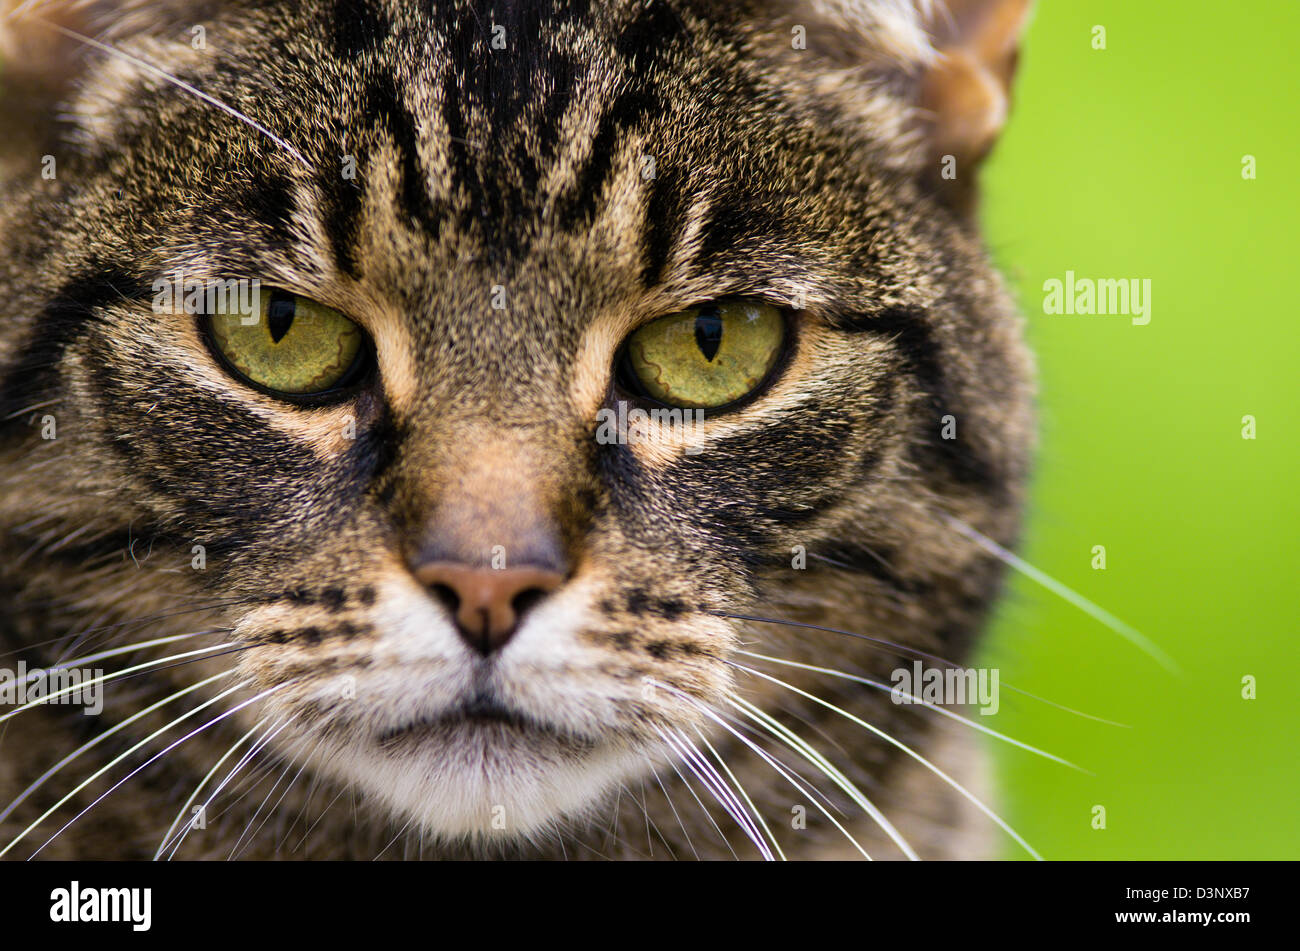 Close up of a tabby cat with green eyes staring into camera Stock Photo